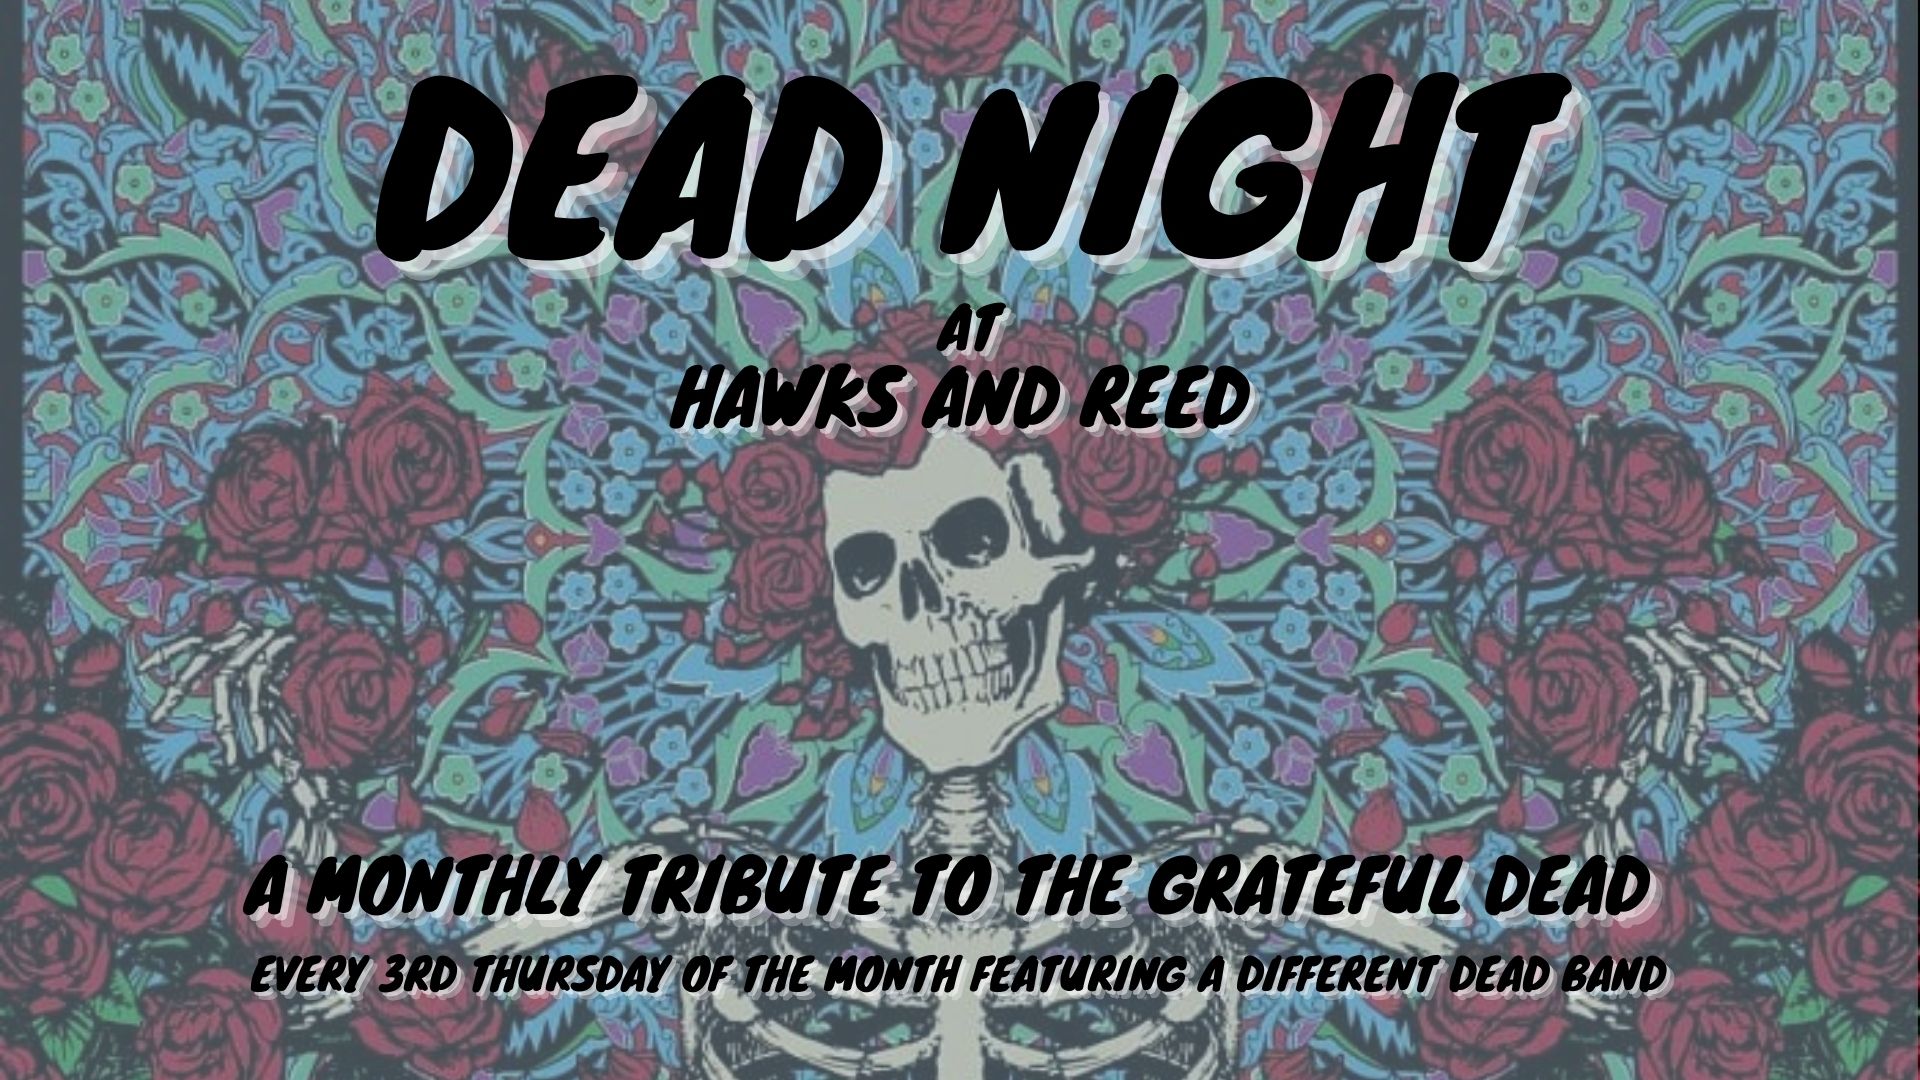 DEAD NIGHT AT HAWKS AND REED – Ft. The Dead Collective